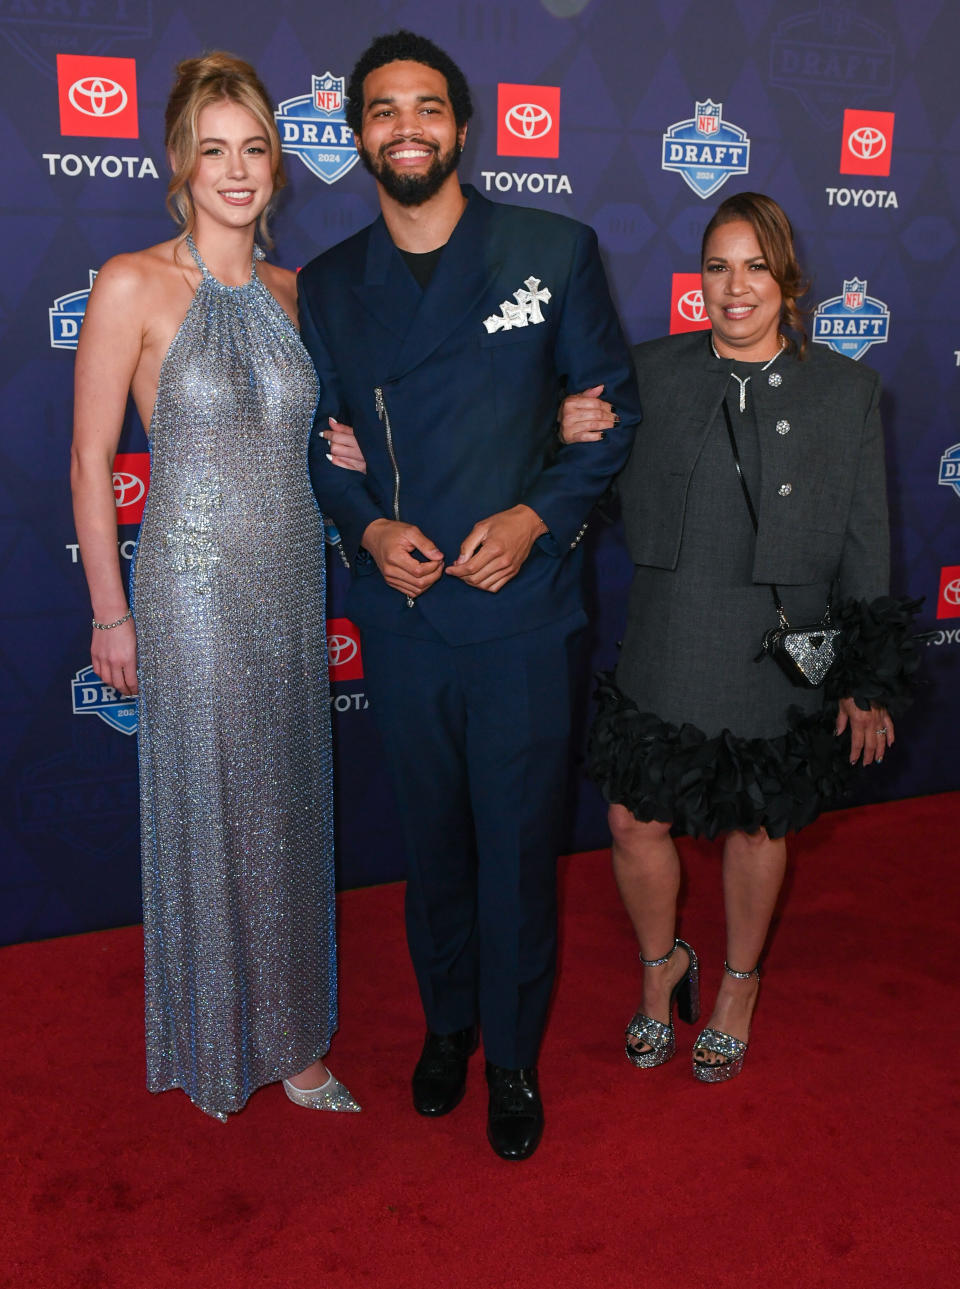 caleb williams outfit, DETROIT, MICHIGAN - APRIL 25: Caleb Williams (C) of the USC Trojans with guests arrive to the 2024 NFL Draft at the Fox Theatre on April 25, 2024 in Detroit, Michigan. (Photo by Aaron J. Thornton/Getty Images)